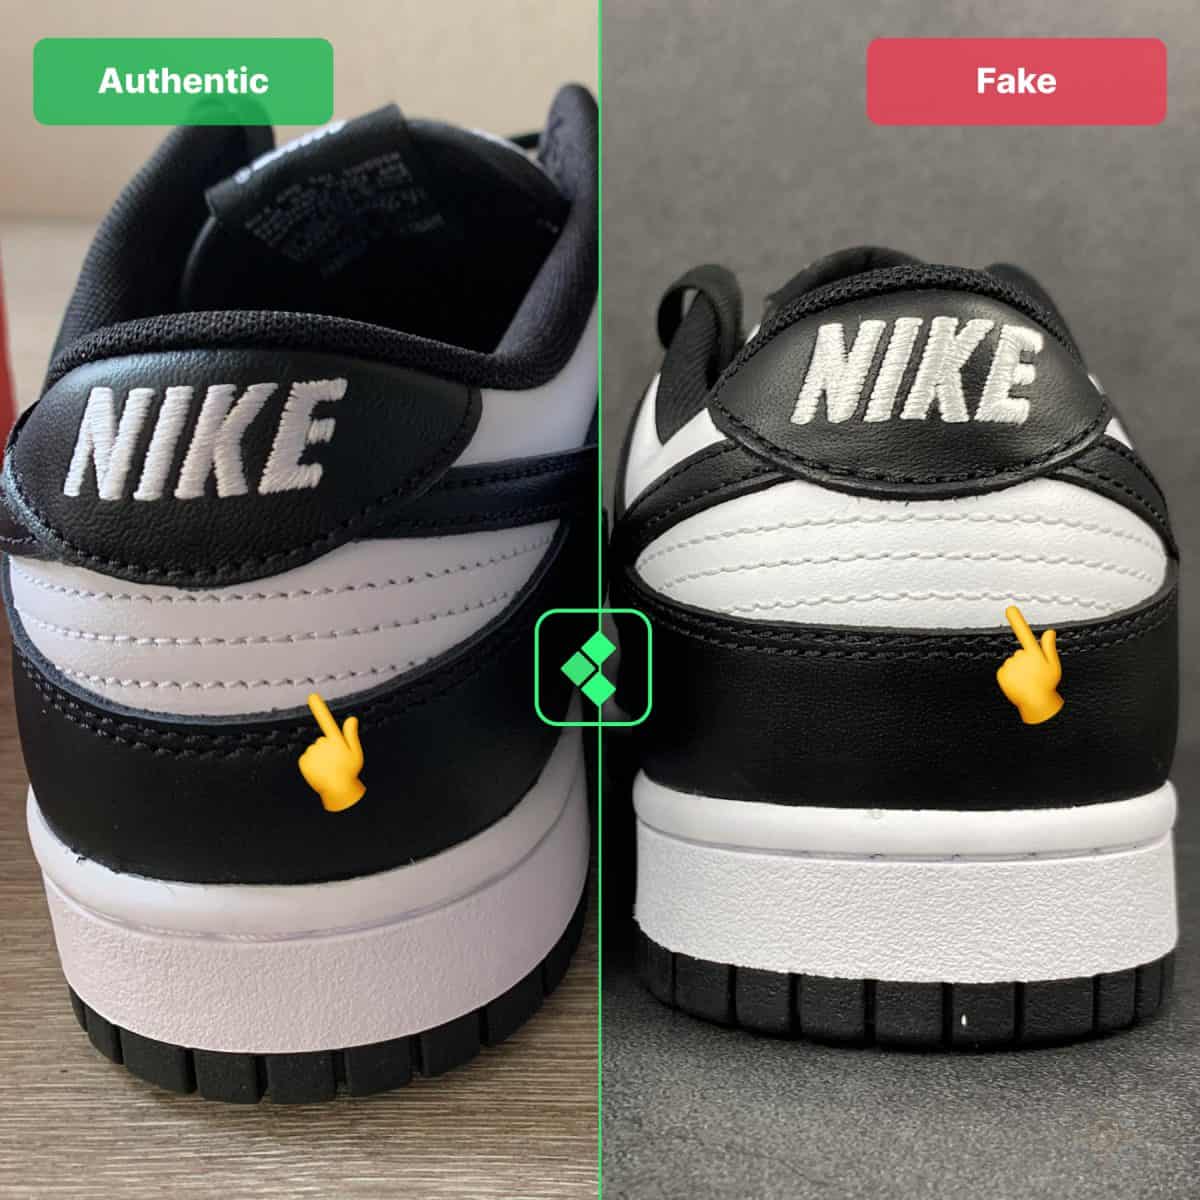 How To Authenticate Nike Dunk Low Black White